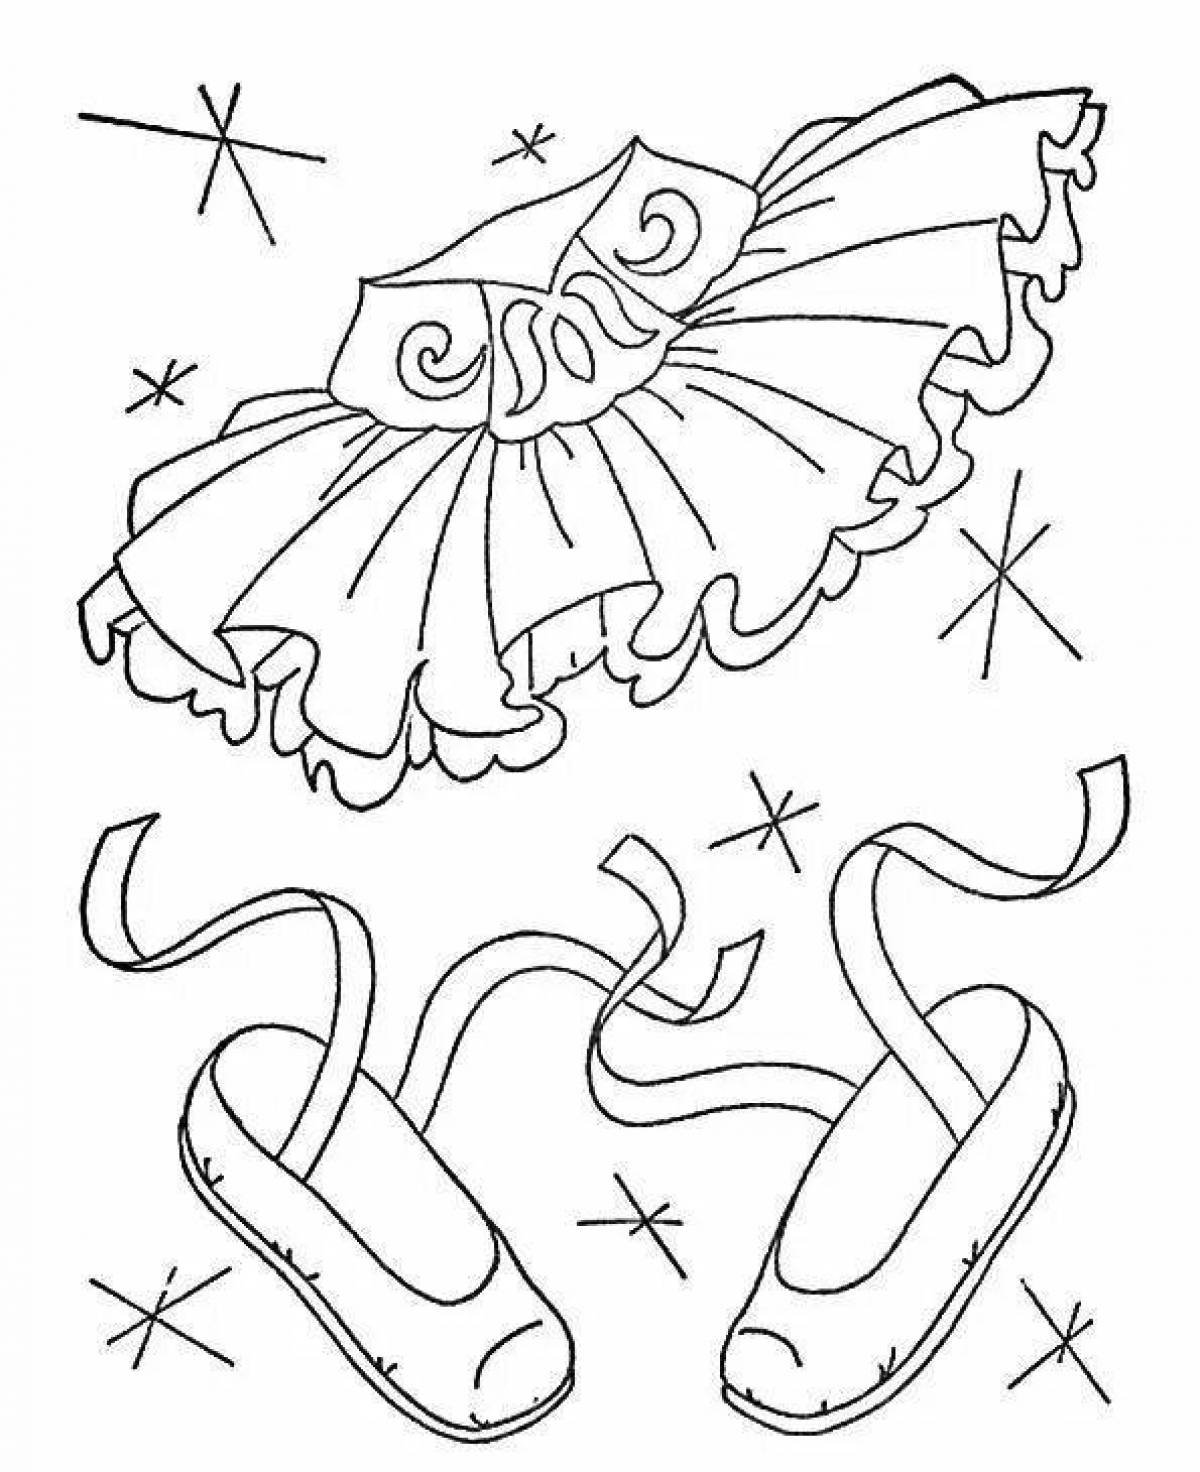 Coloring page funny pointe shoes